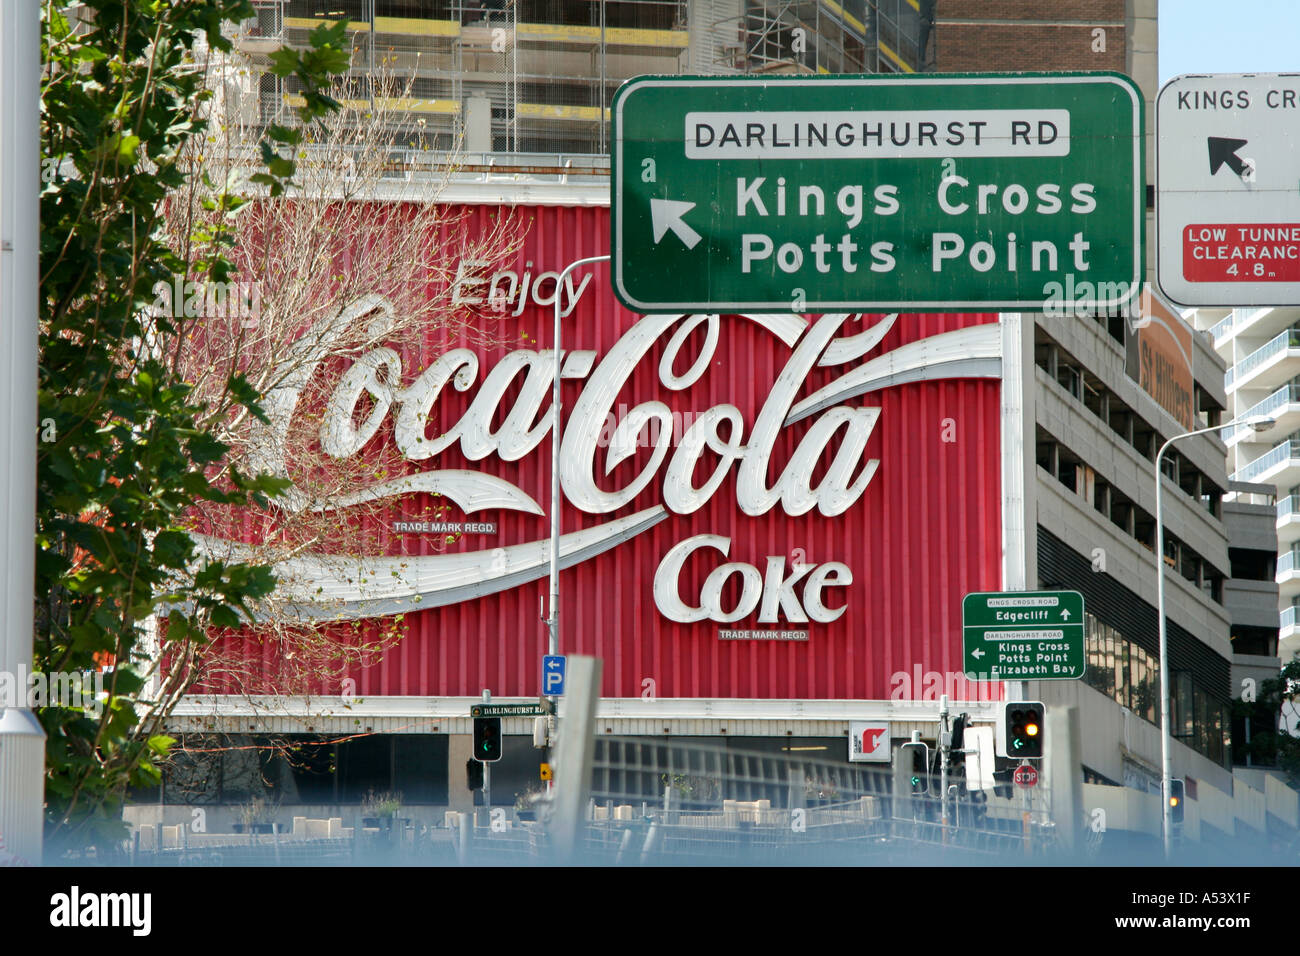 Famous coca cola sign by Darlinghurst Road in the Kings Cross area of  Sydney Australia Stock Photo